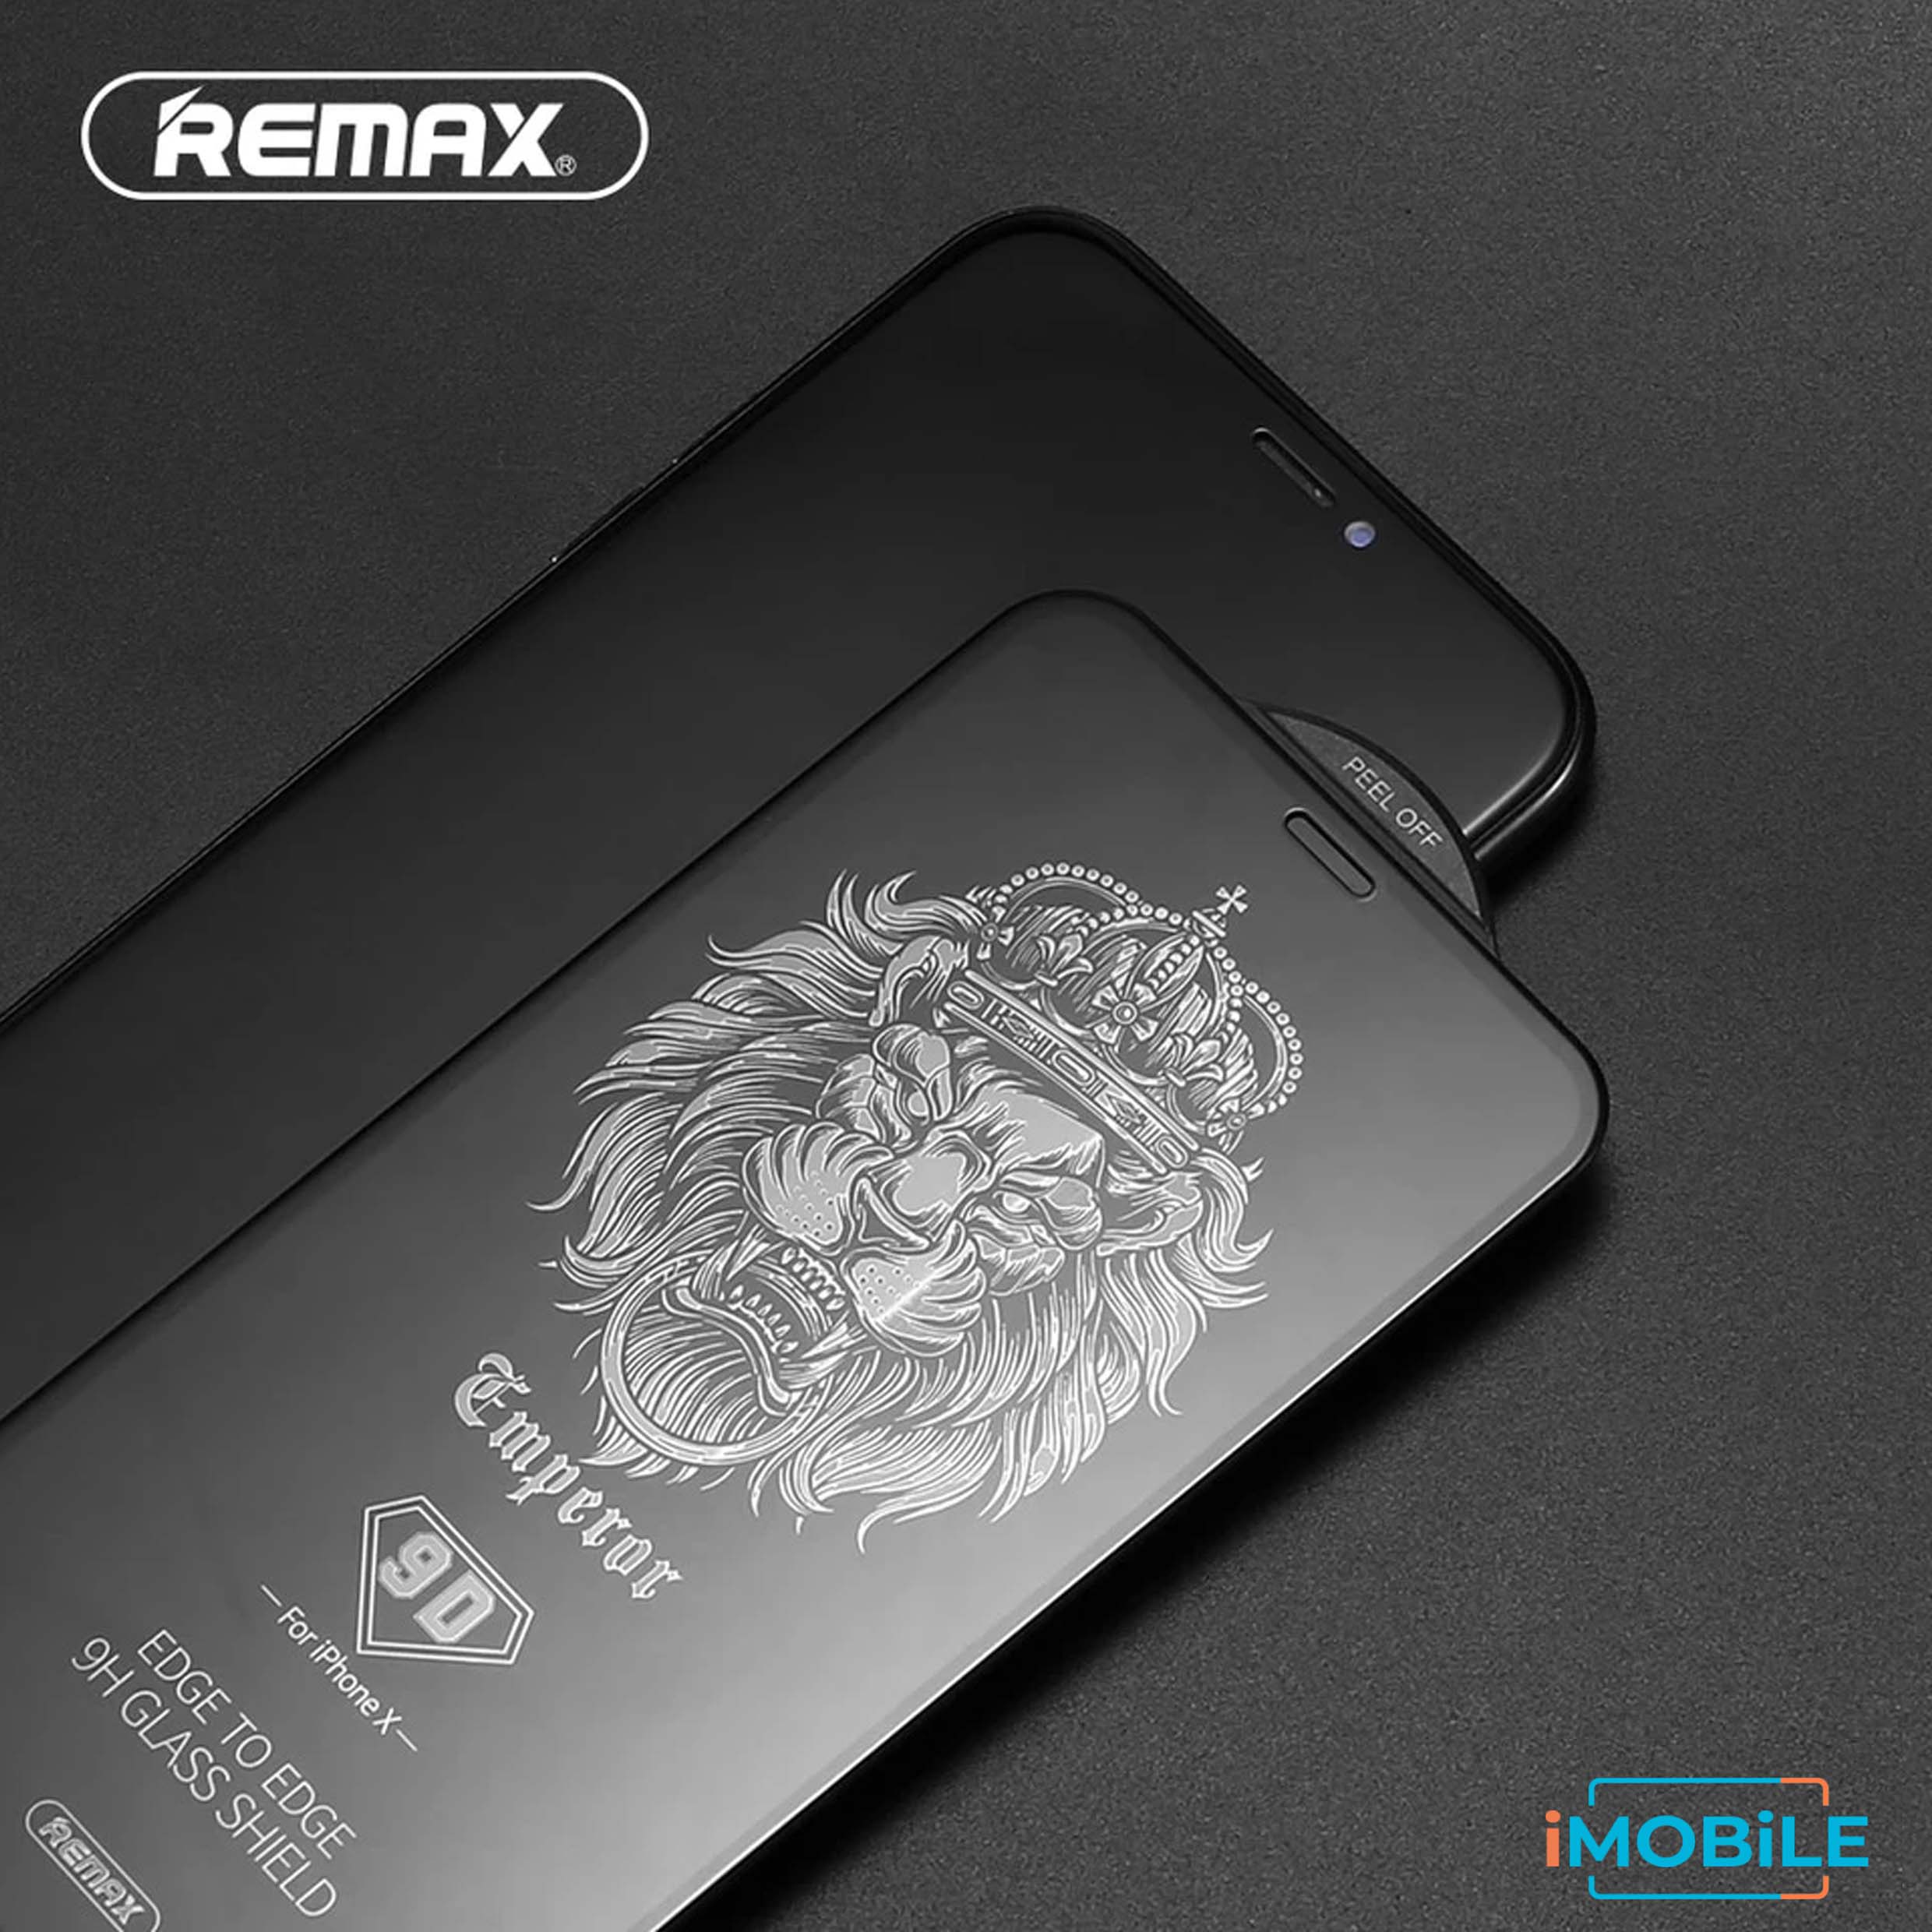 Remax 2.5D Tempered Glass with Envelope Pack, iPhone 7/8 [Black]